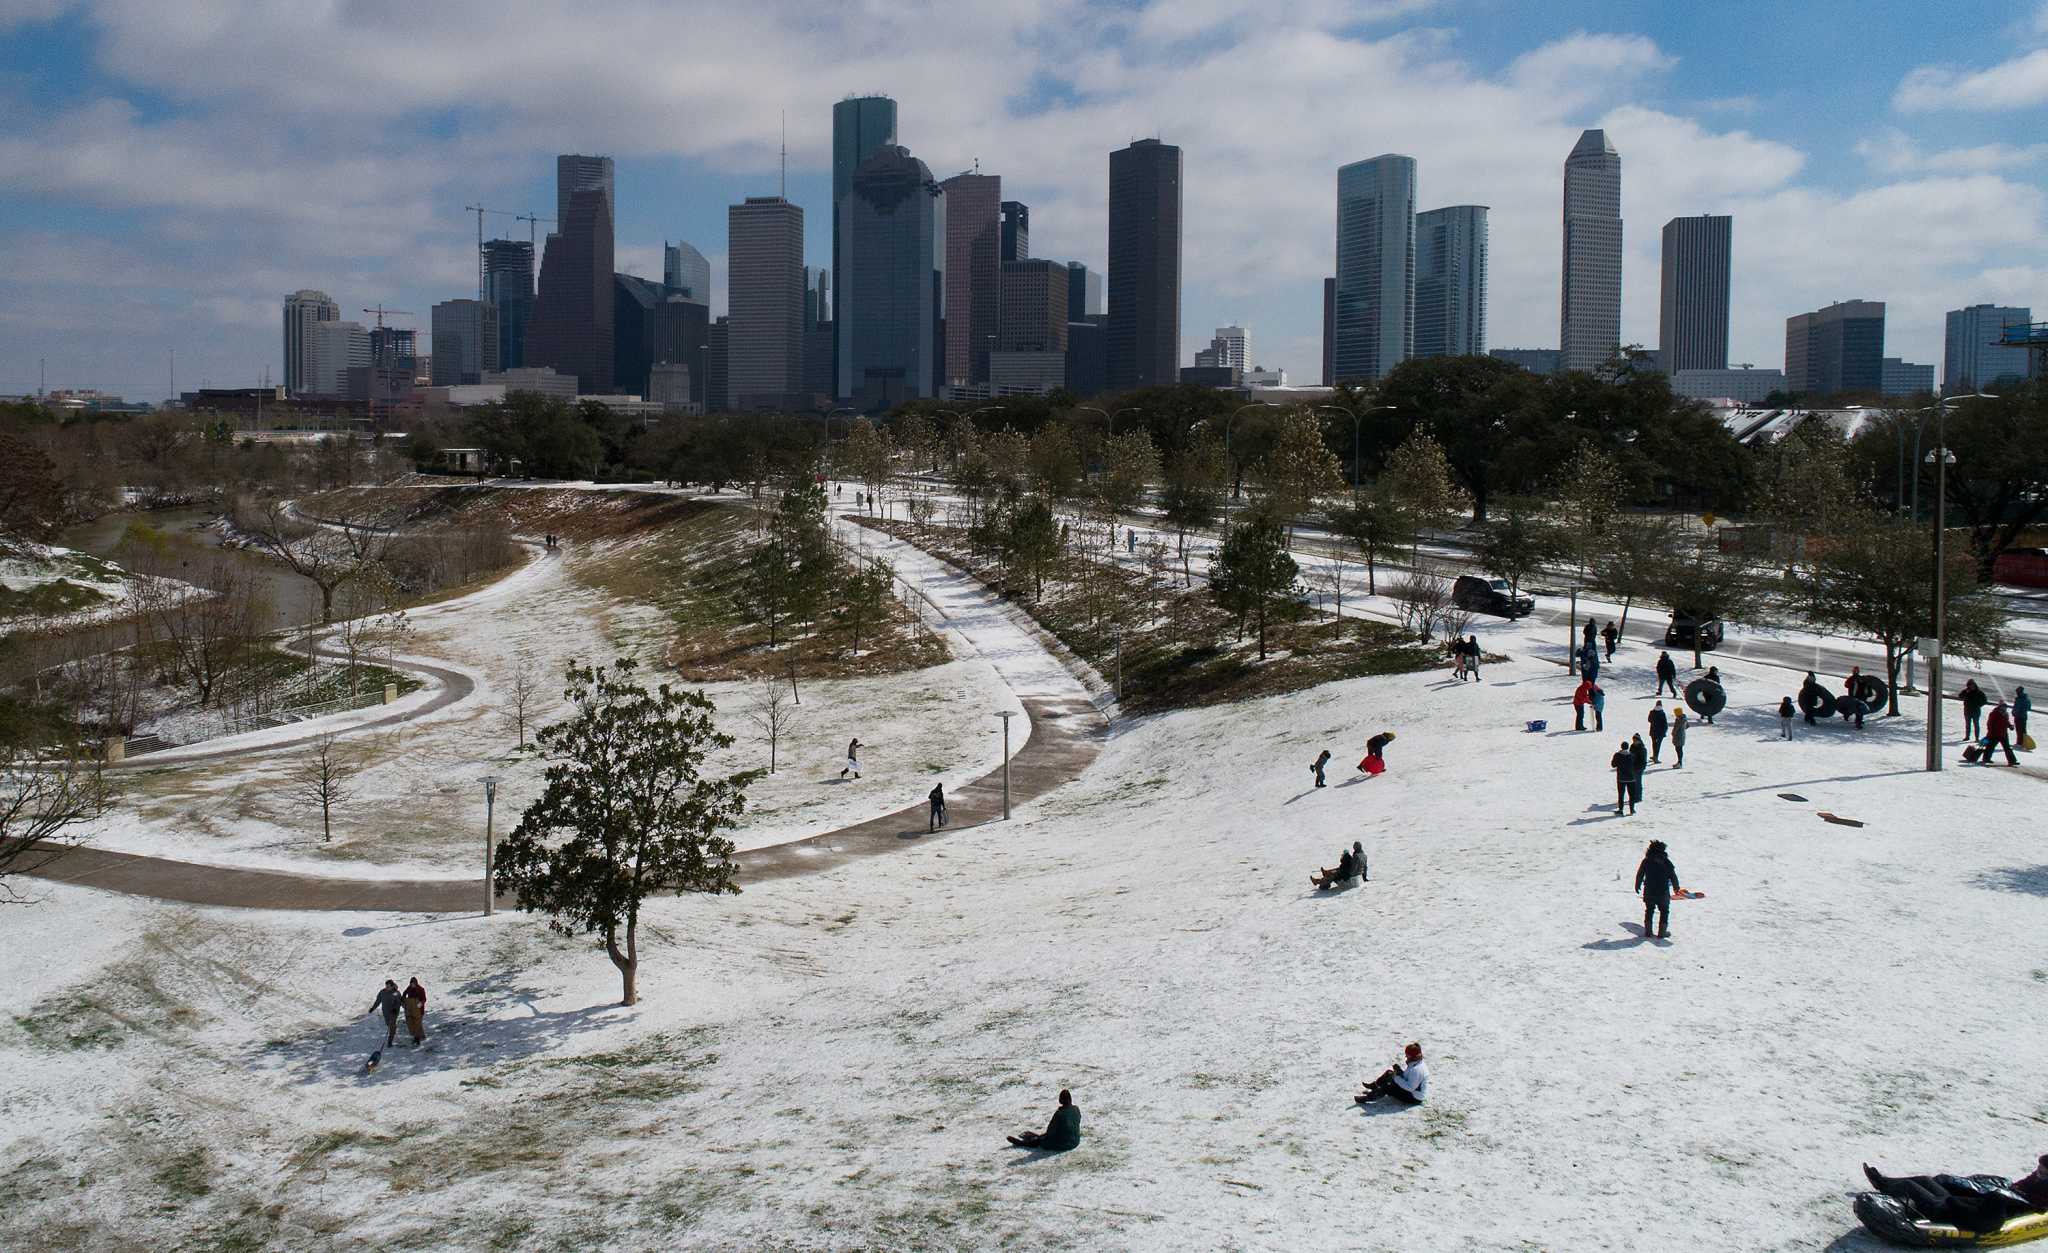 Watch Just another snowy Monday morning in Houston